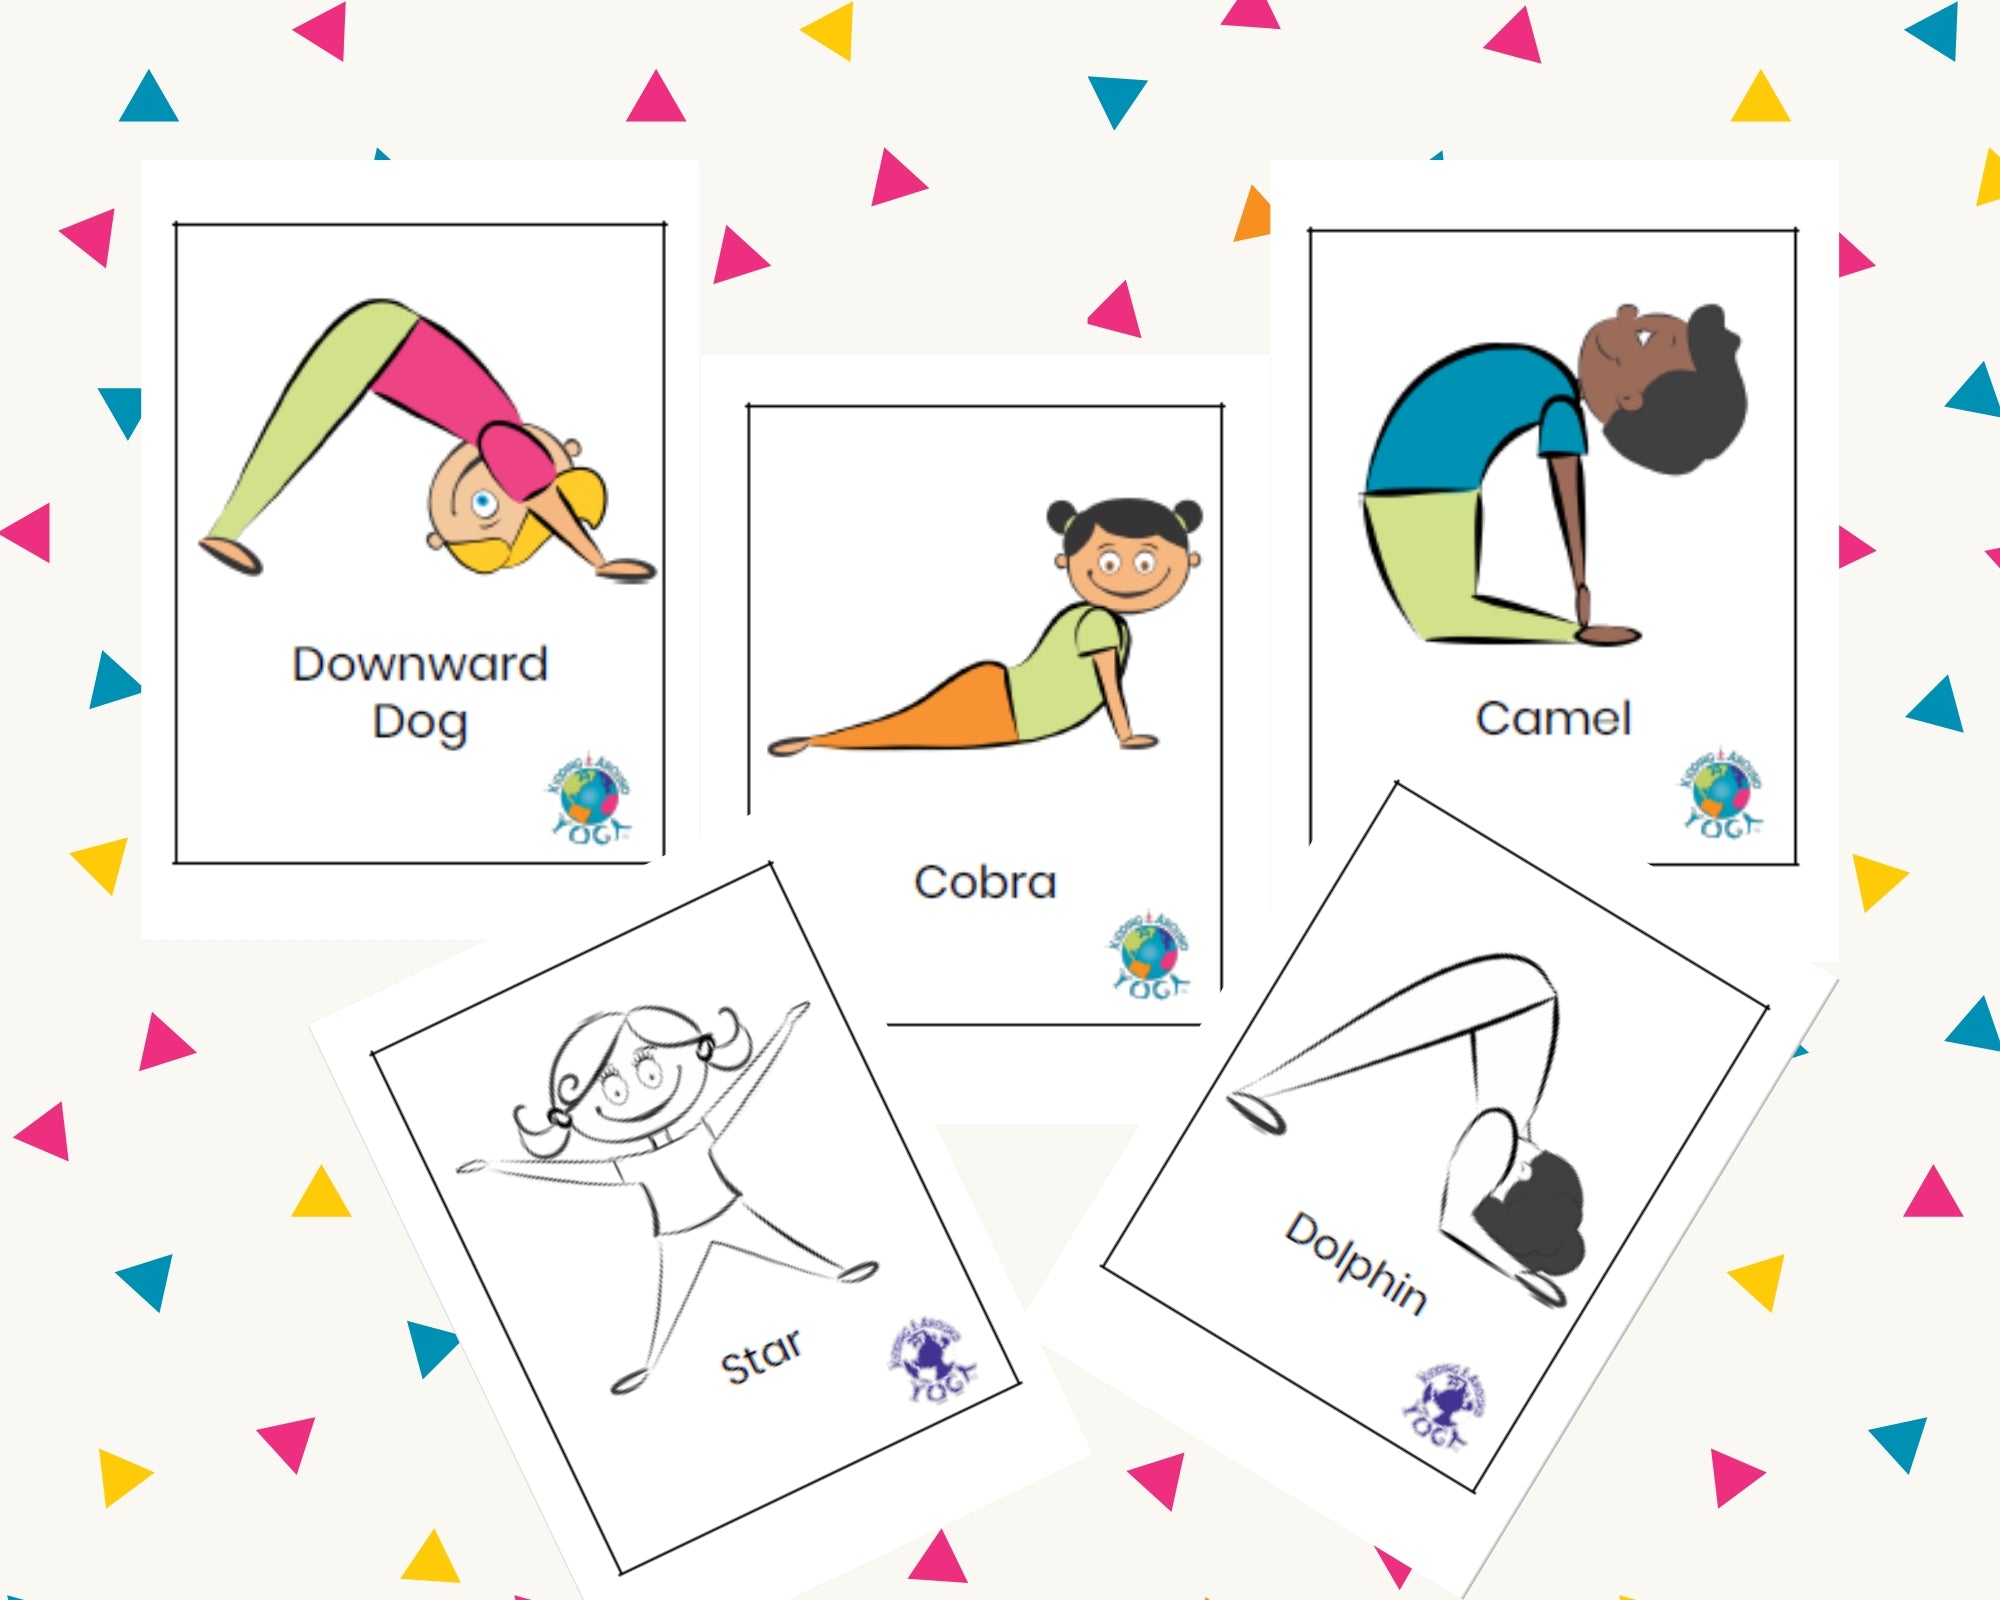 Learn Yoga Online with Yoga cards and Videos